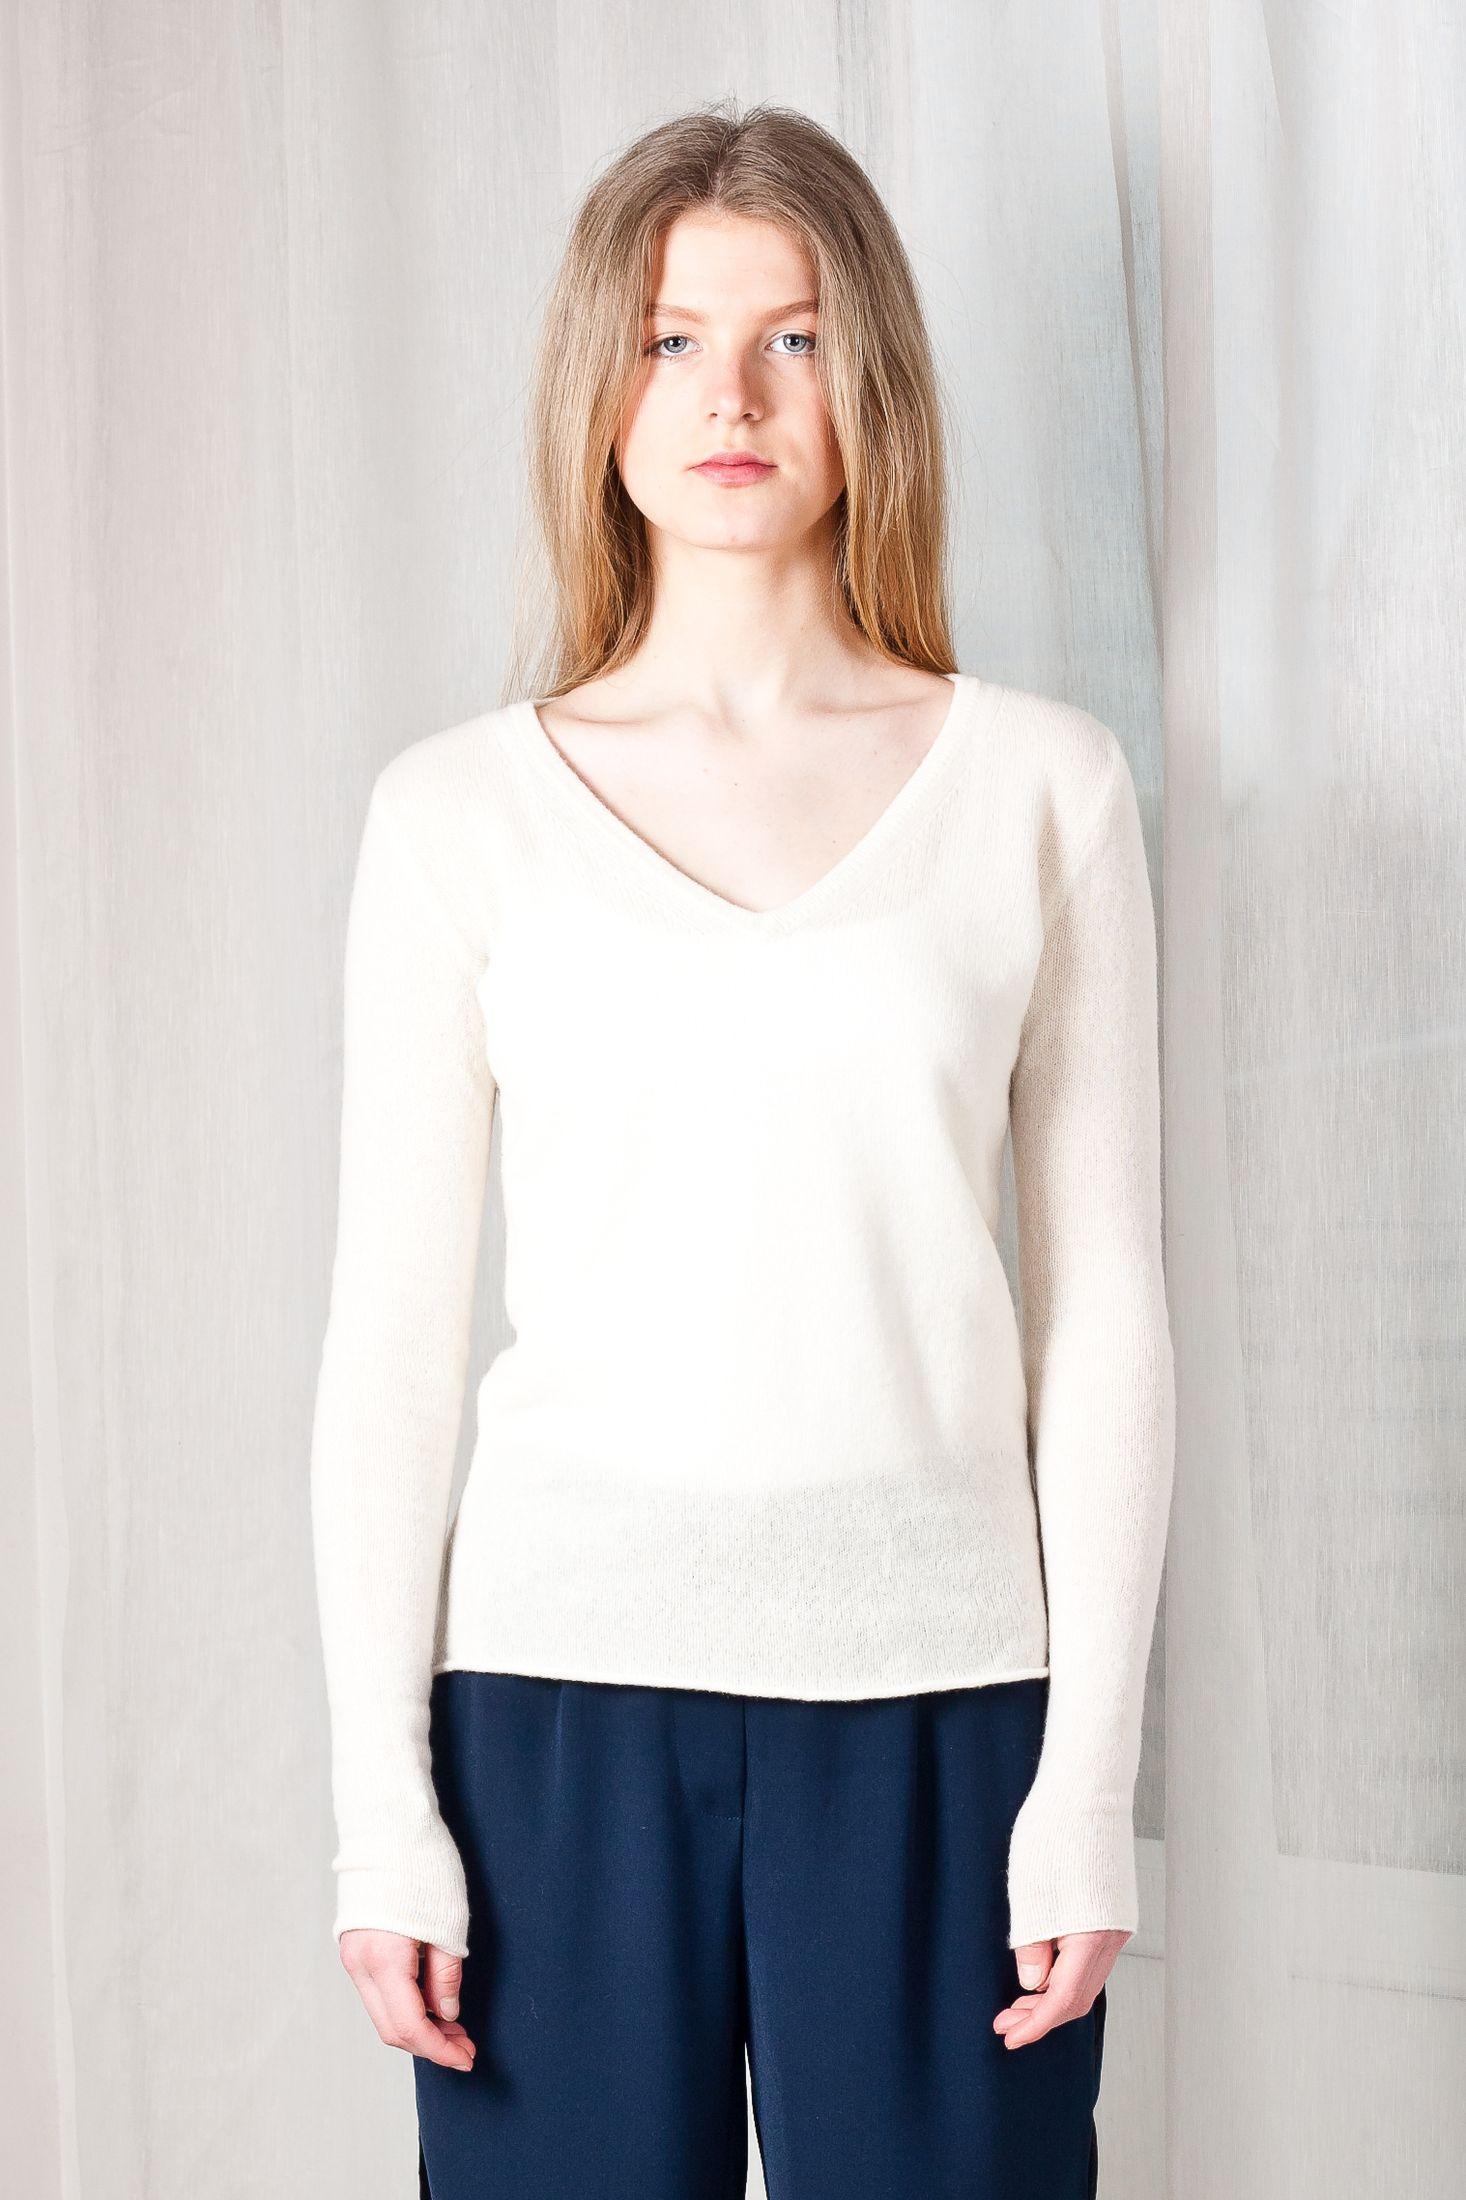 Elevate your style with MARGO V, Krista Elsta's off-white cashmere V-neck sweater. Unparalleled comfort and sophistication in one chic wardrobe staple.